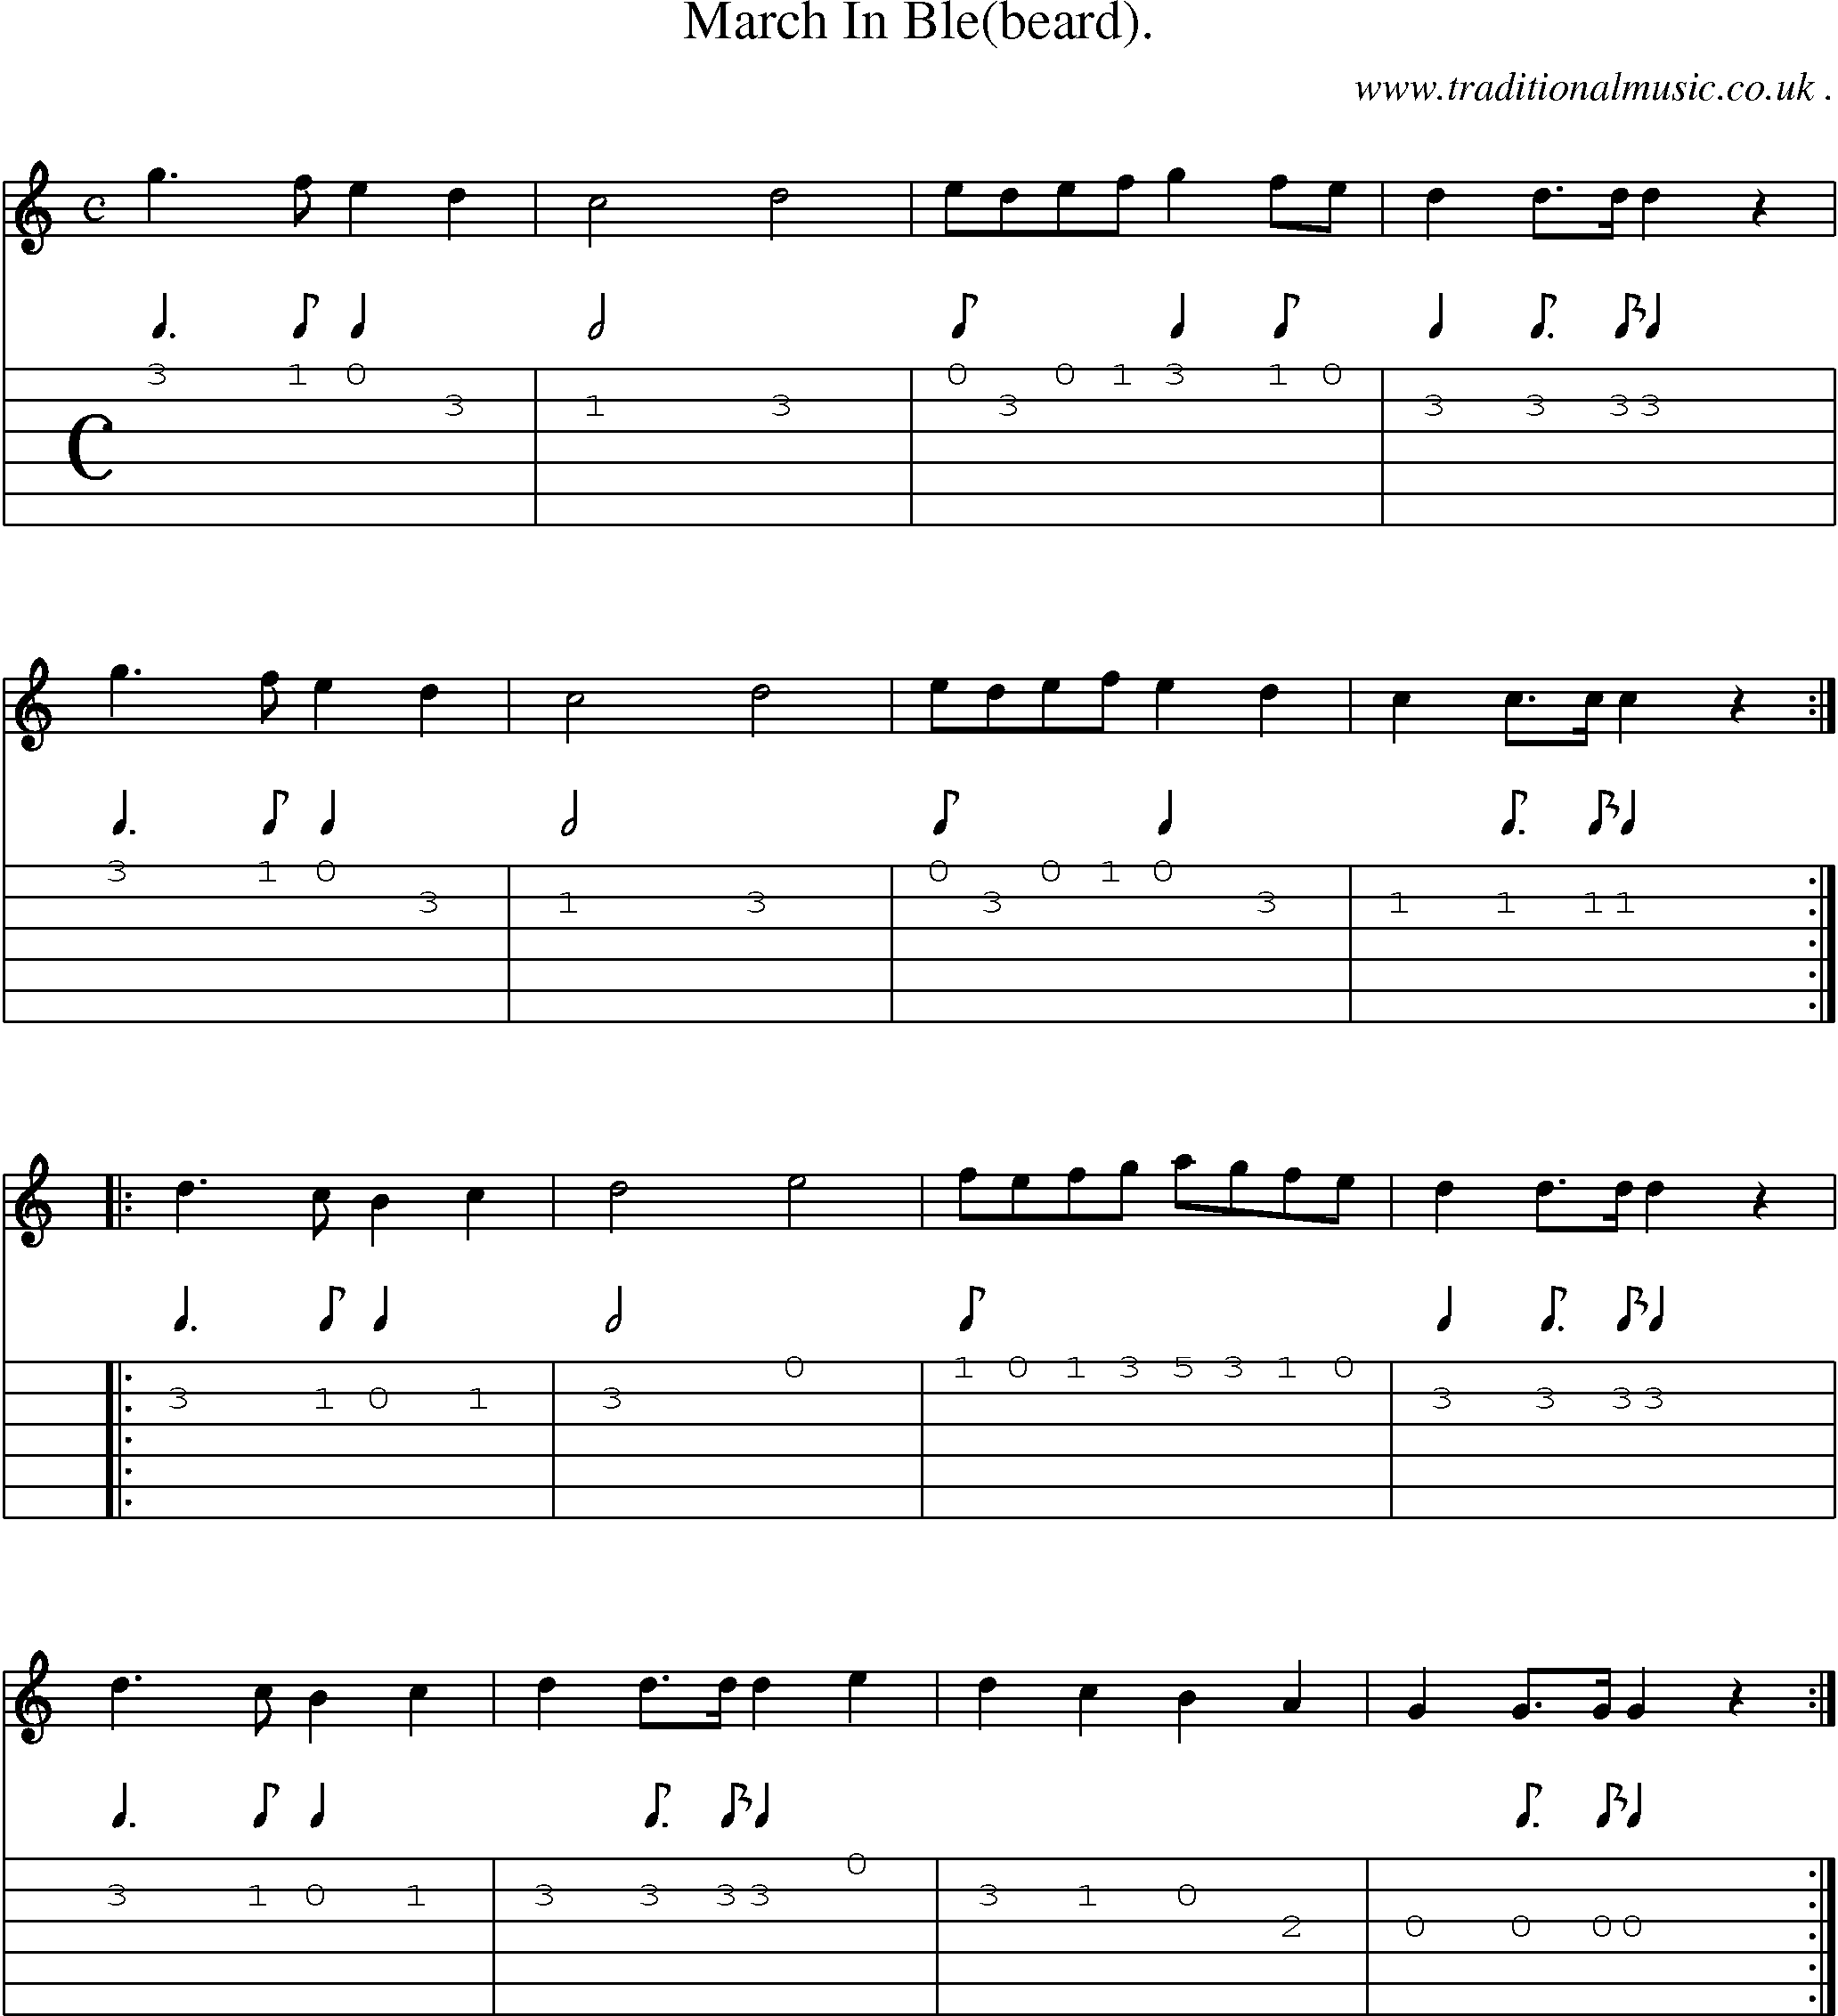 Sheet-Music and Guitar Tabs for March In Ble(beard)